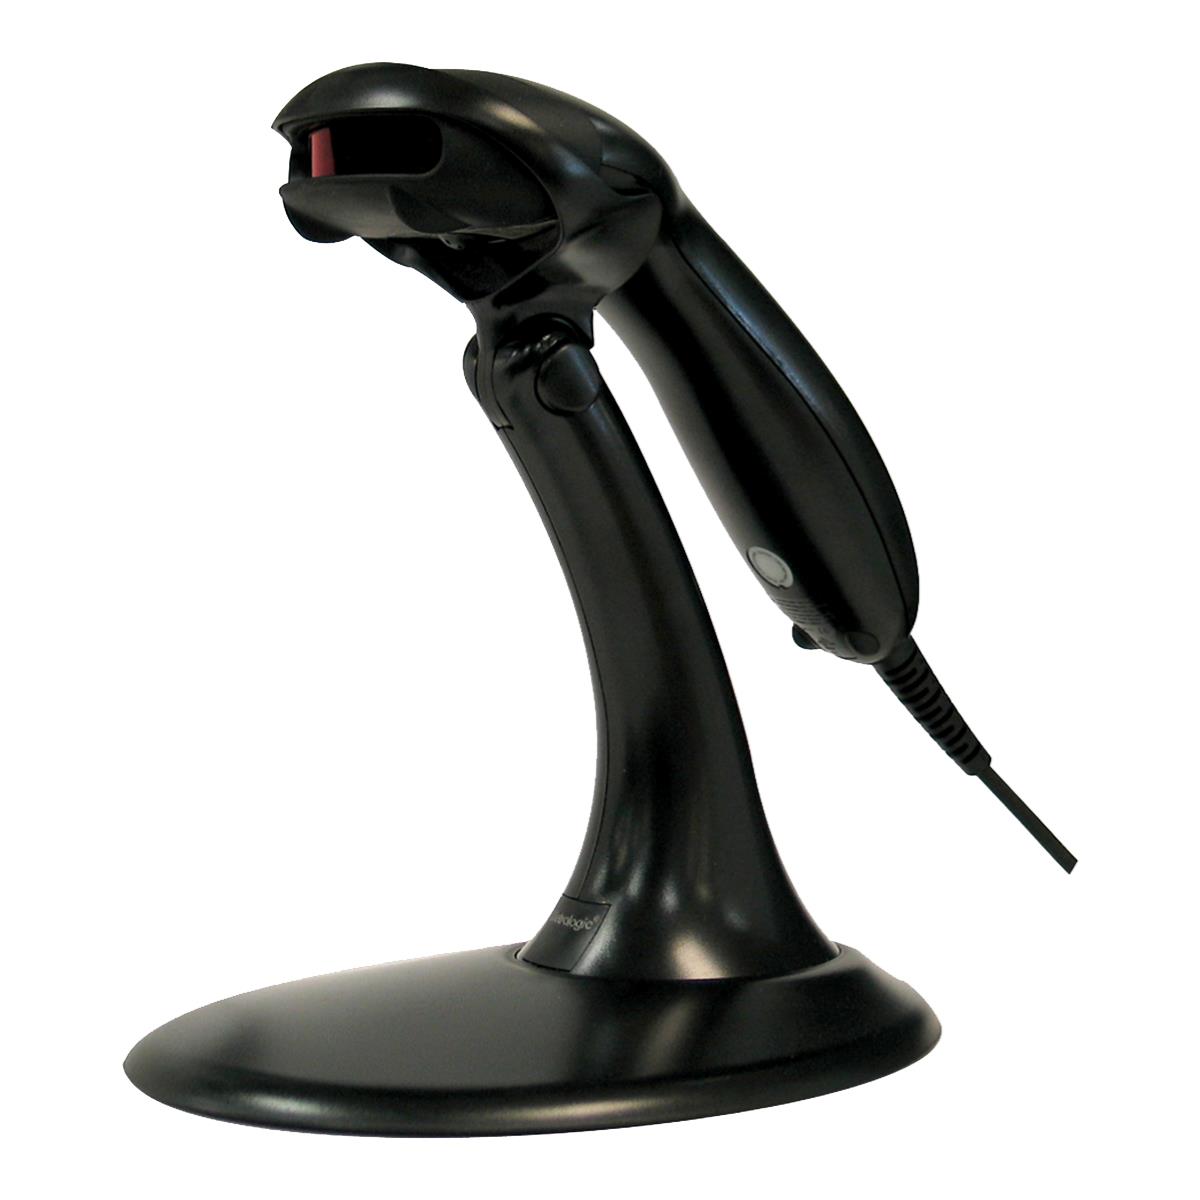 A black handheld barcode scanner in an upright position on a matching stand with a visible cord.